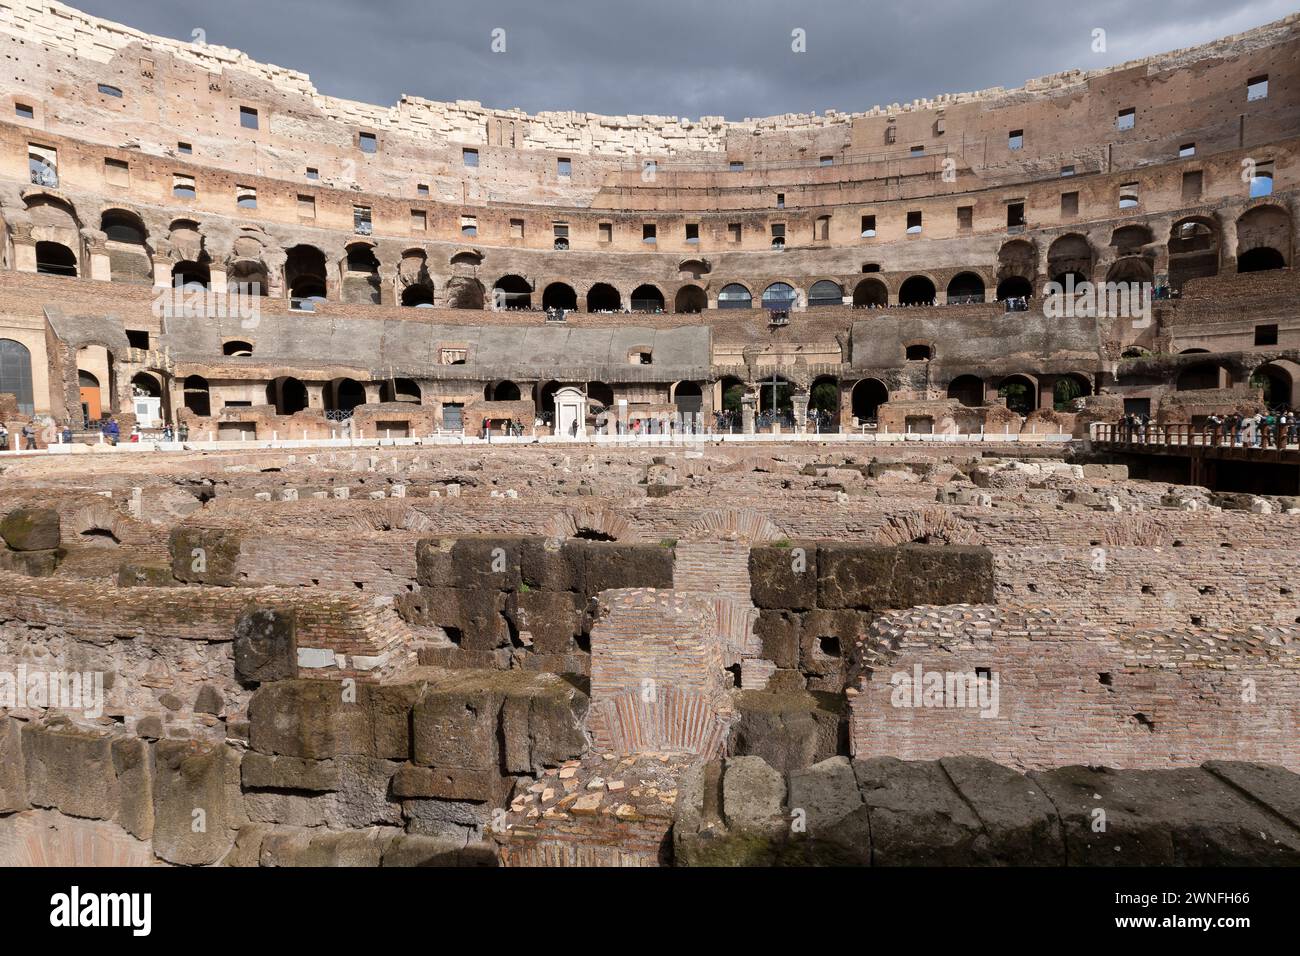 Rome, Italy - March 02, 2023: Tourists walking inside the Roman Colosseum in Rome, Italy Stock Photo